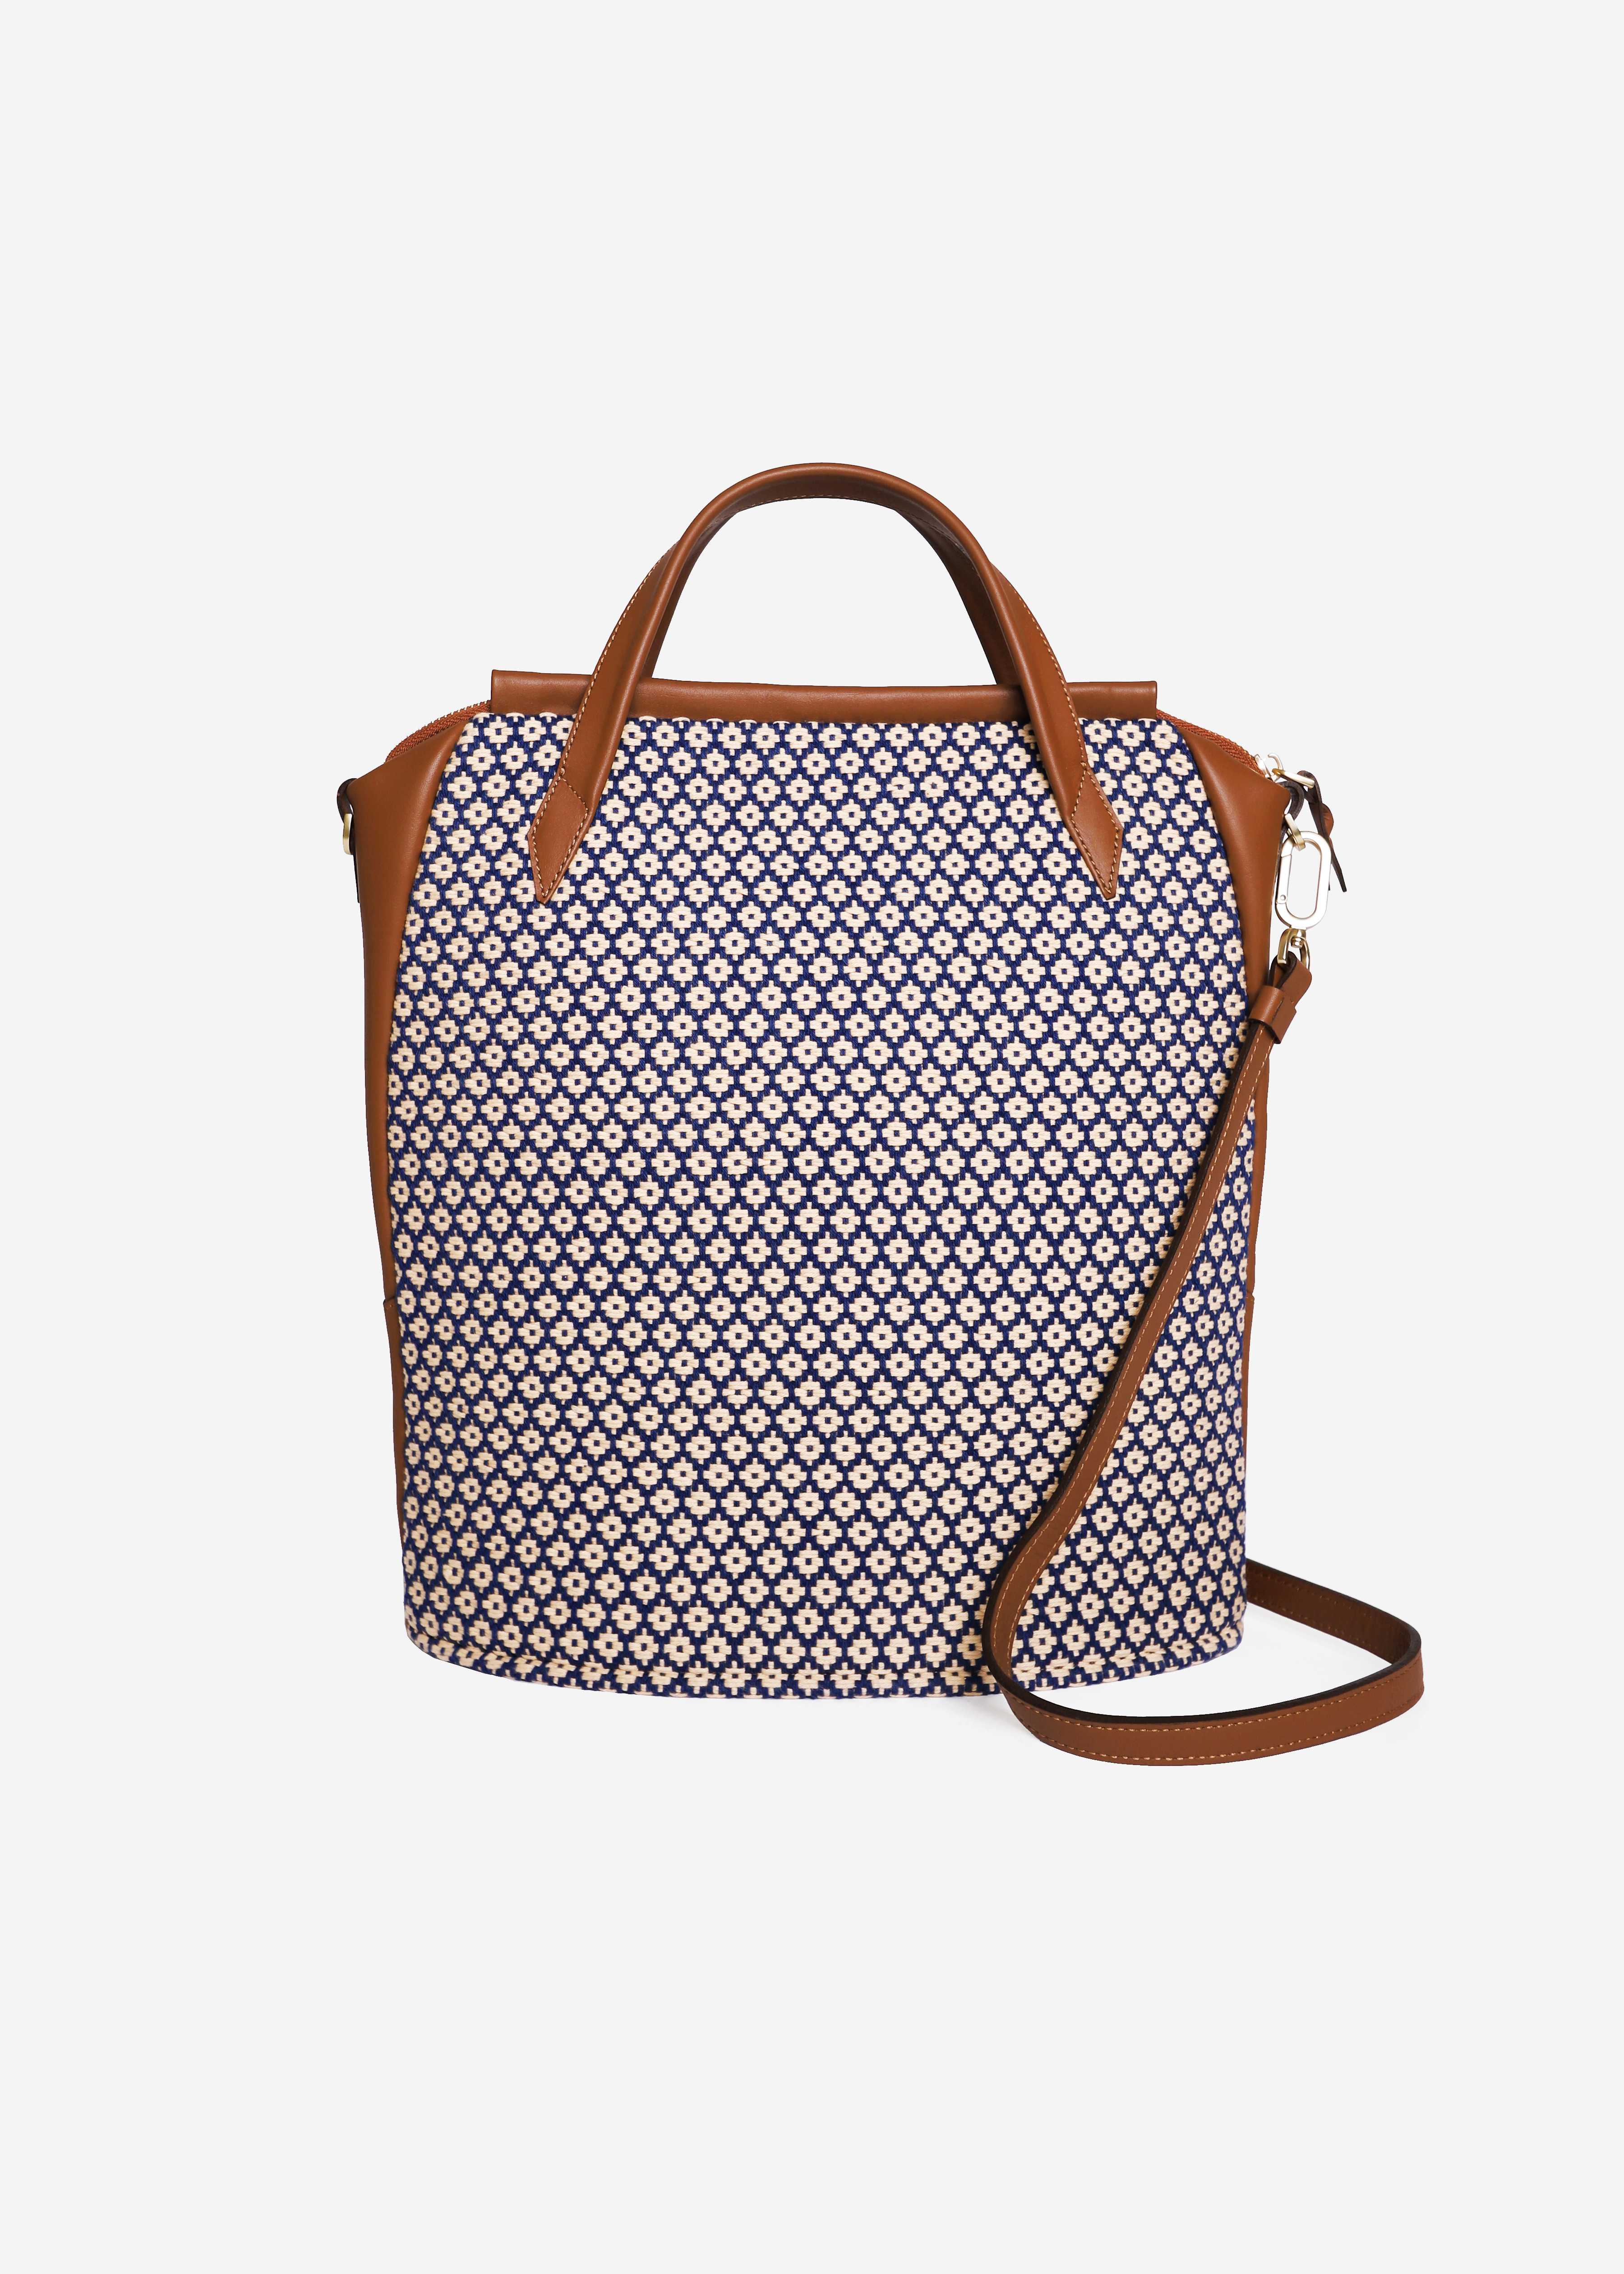 Chicago M—Bloom / Topaz with Brown Leather | LINE SHOPPING